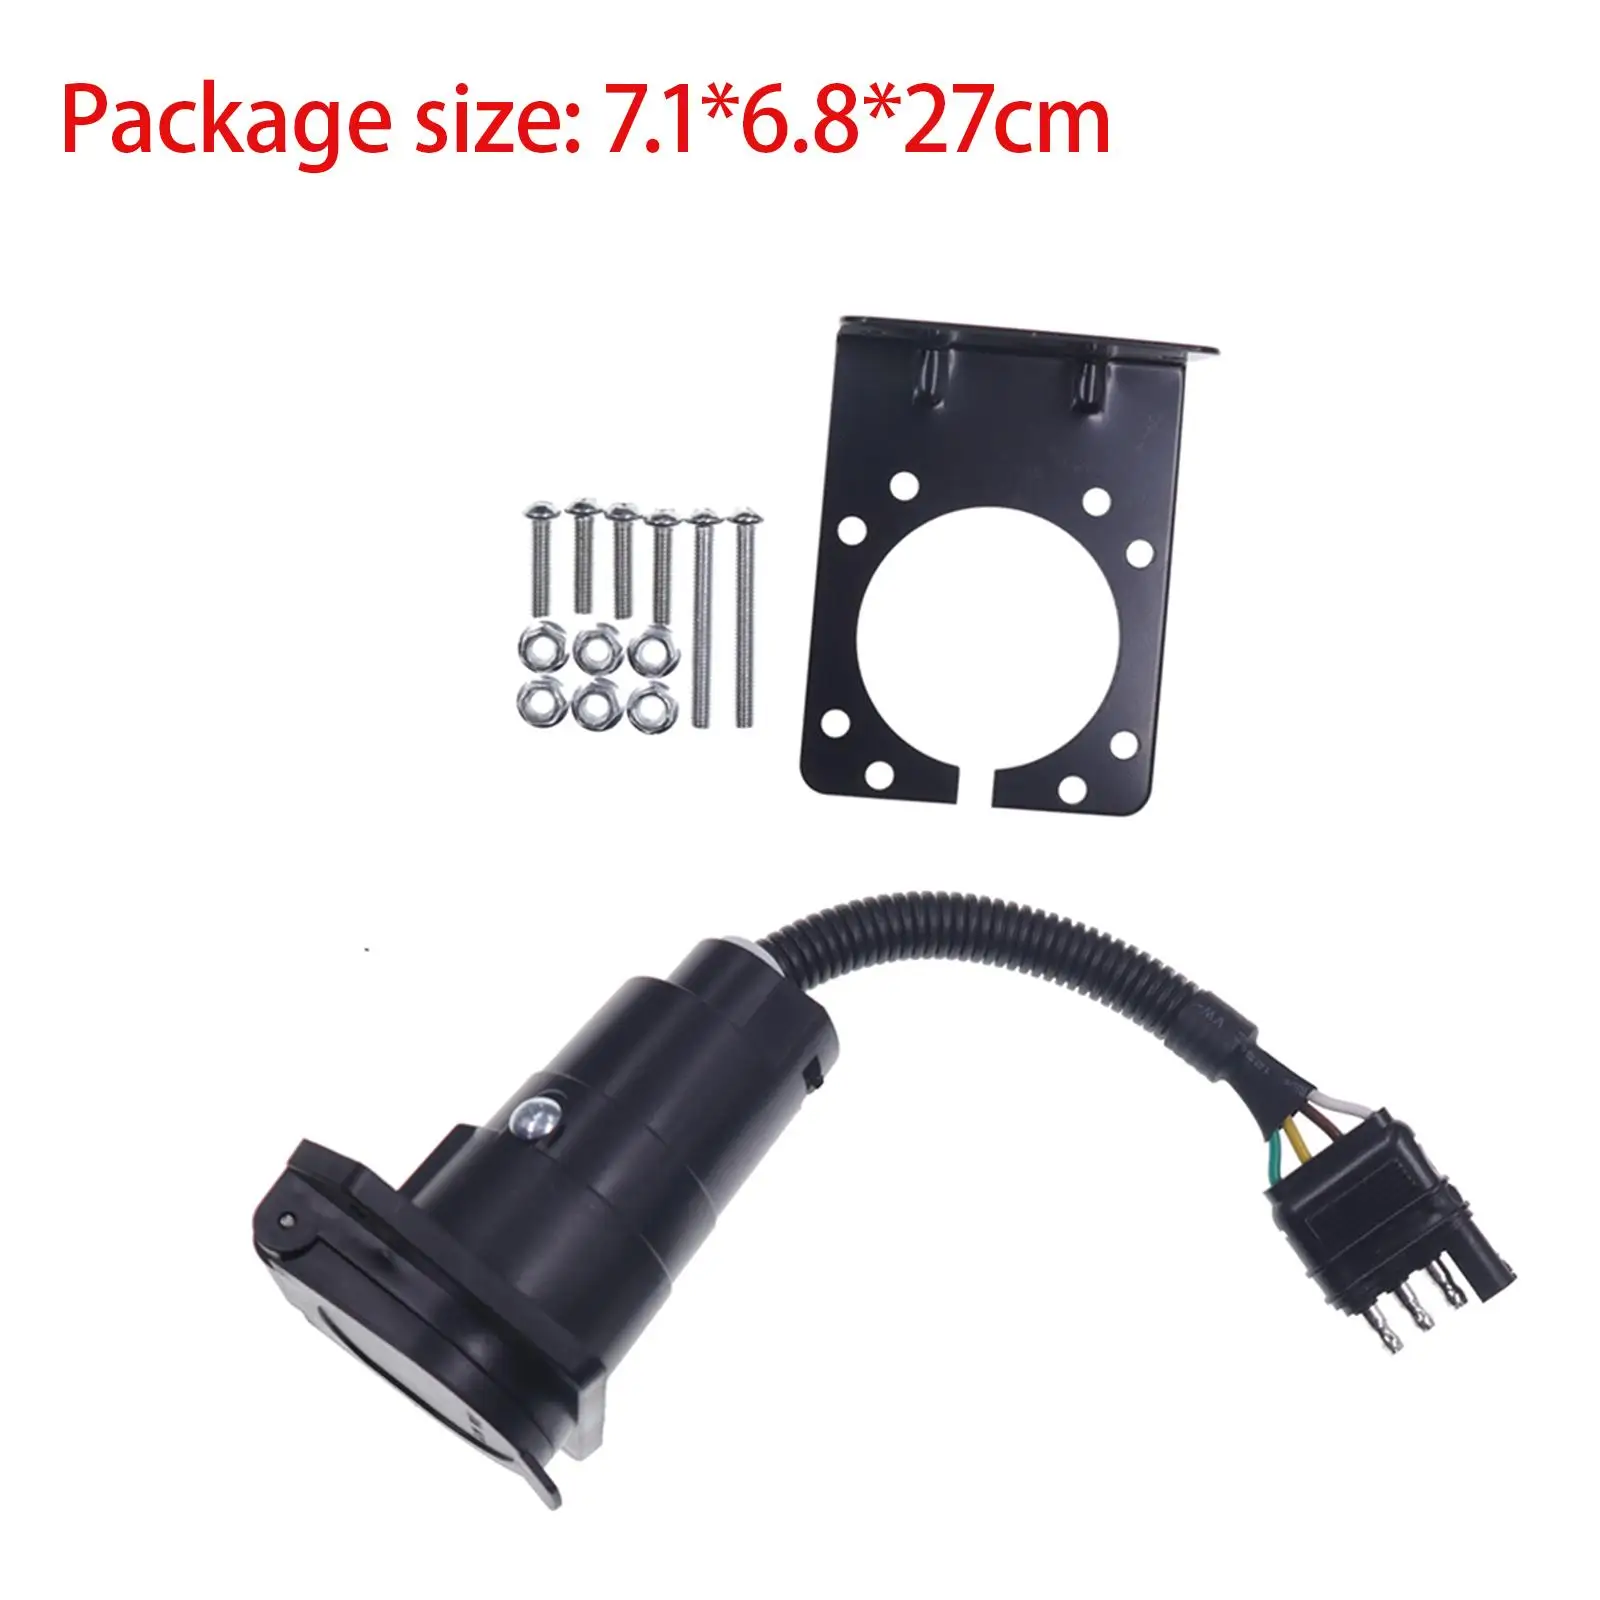 Trailer Adapter Plug 4 Pin to 7 Pin Trailer Connector Cable Dustproof Cover for Tractor